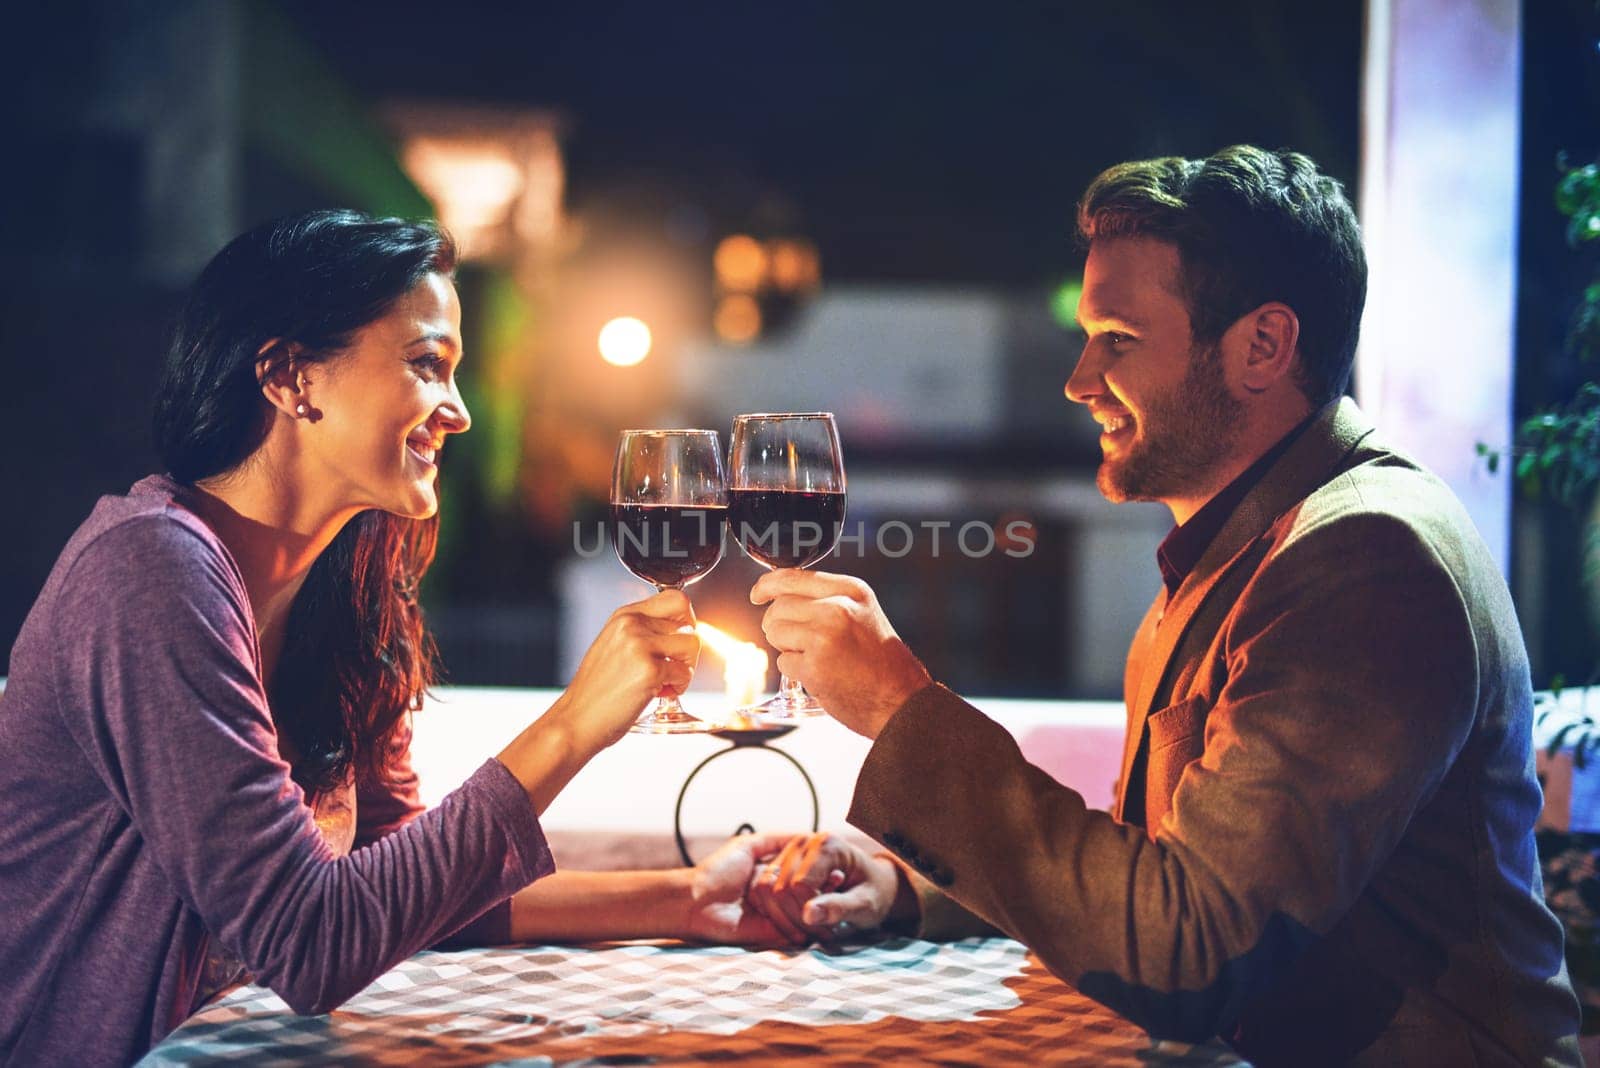 Cheers, wine and couple on date in restaurant, romance and happiness in celebration of love and drinks. Romantic honeymoon night, man and woman toast glasses in cafe, smile on dinner holiday travel